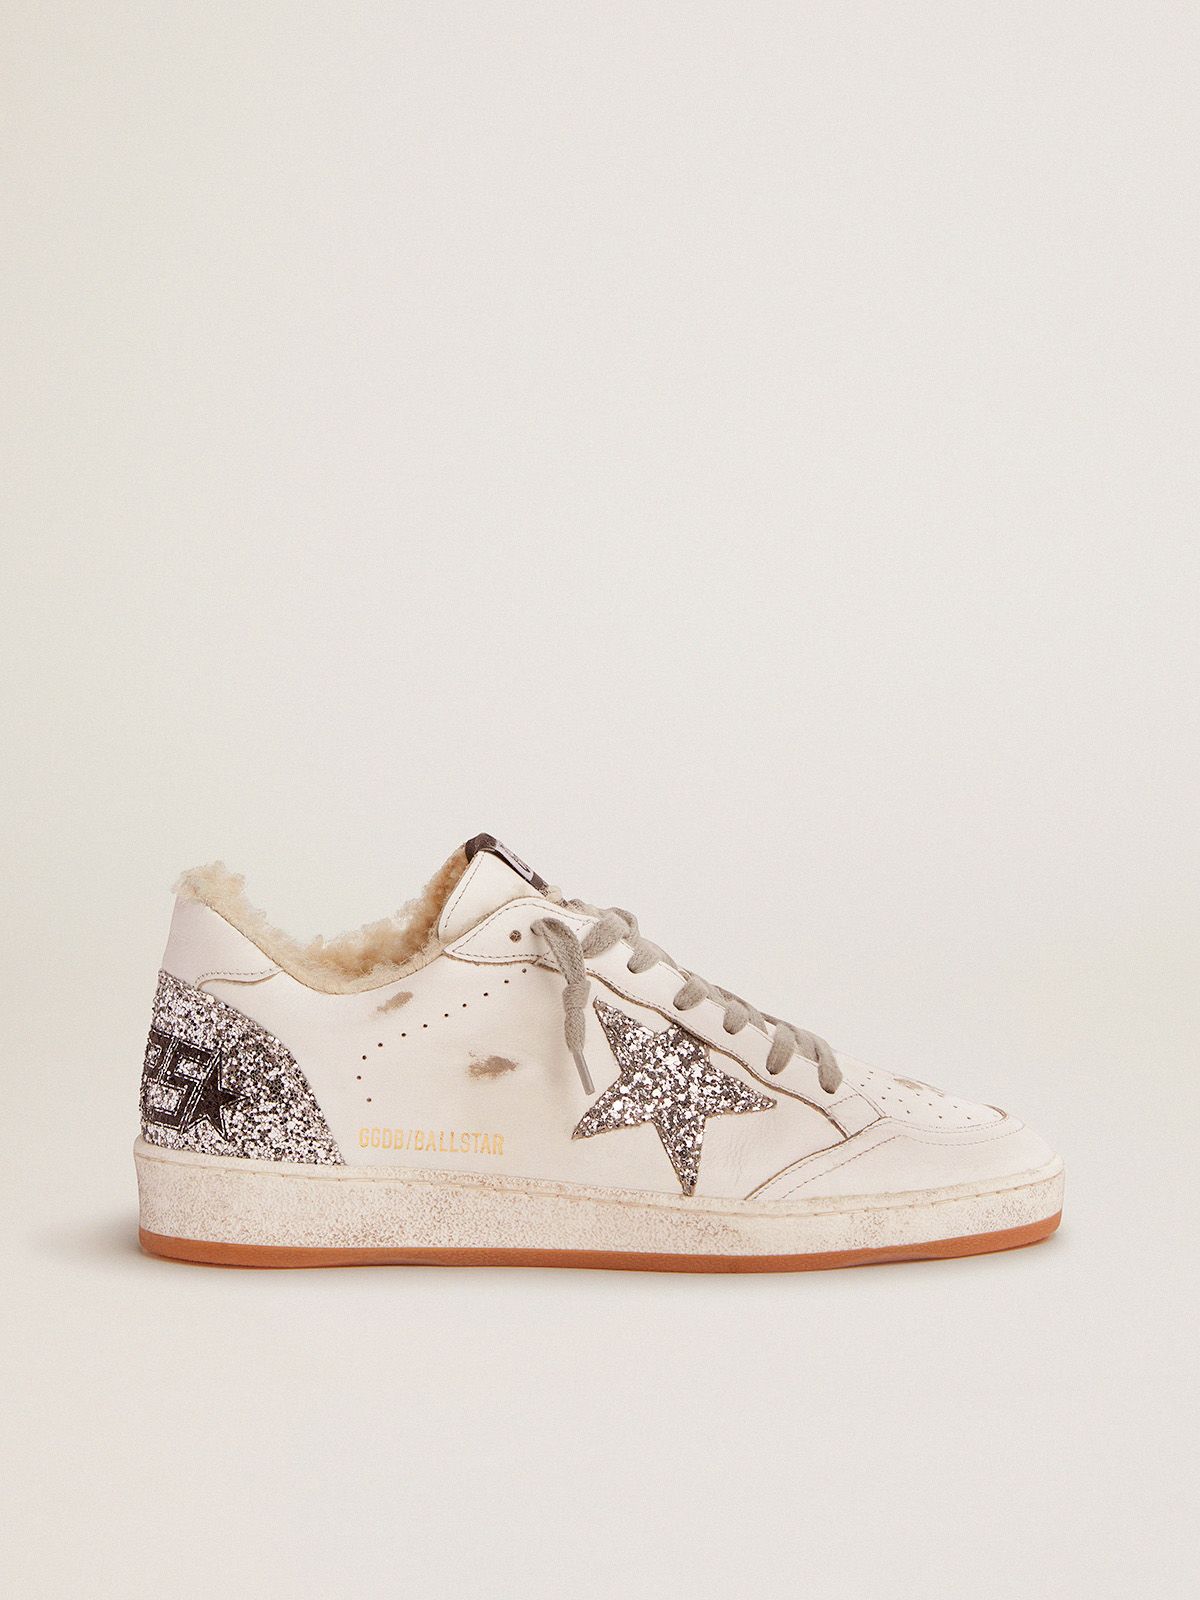 golden goose and Star with glitter sneakers white in lining silver details Ball leather shearling